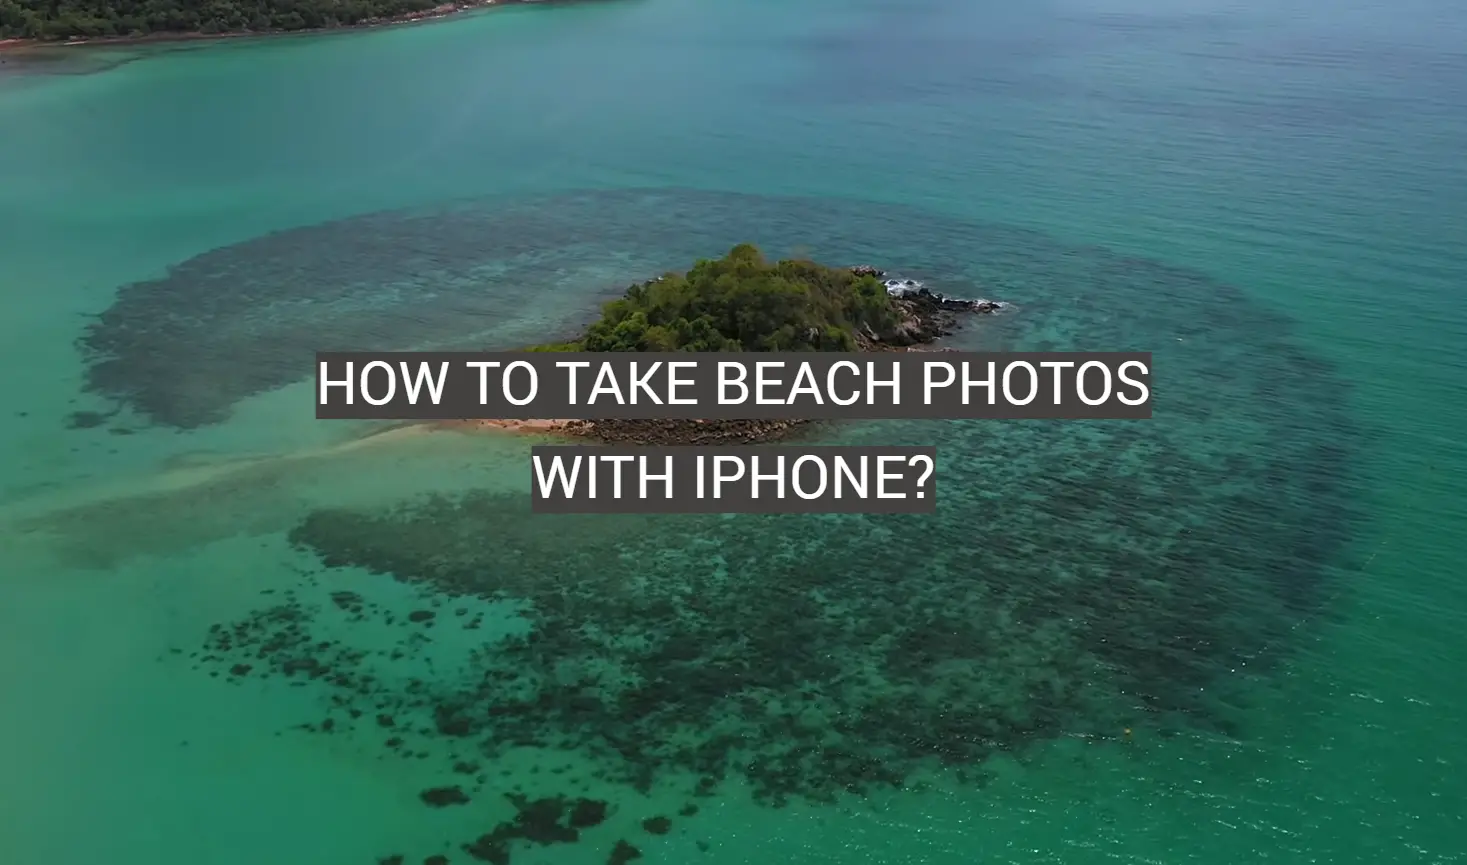 How to Take Beach Photos With iPhone?